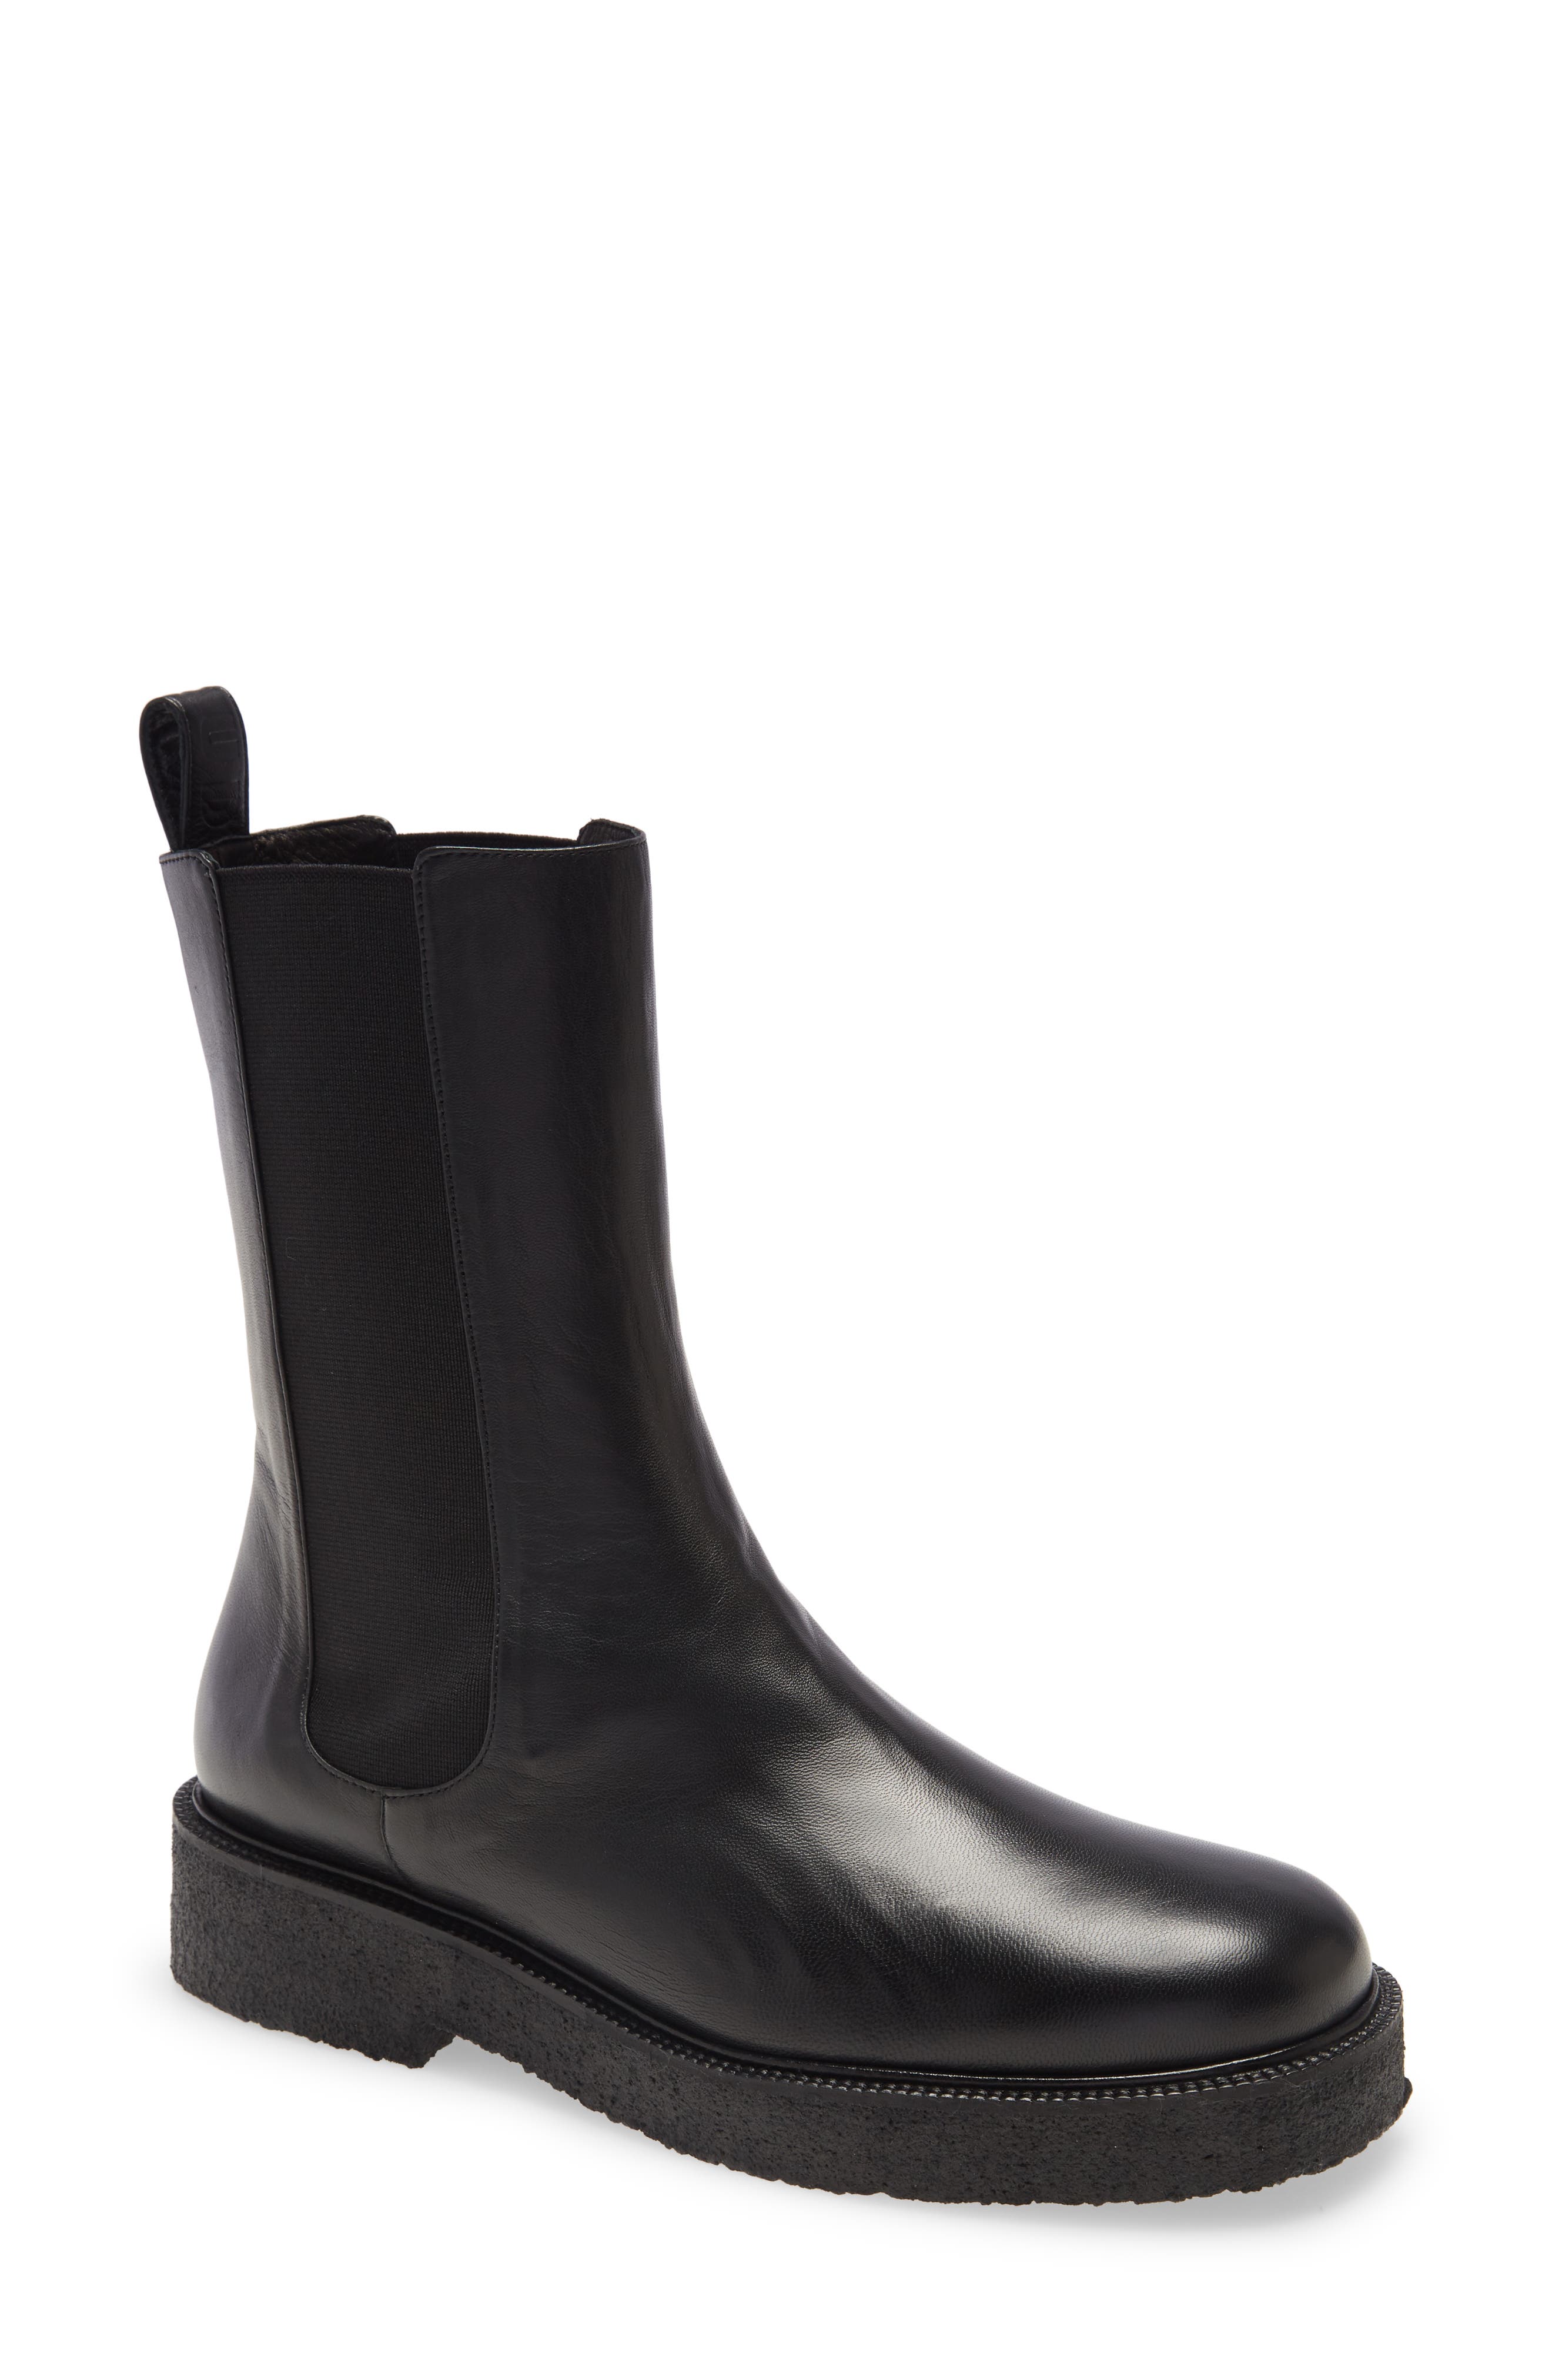 STAUD Palamino Chelsea Boot in Ivory at Nordstrom